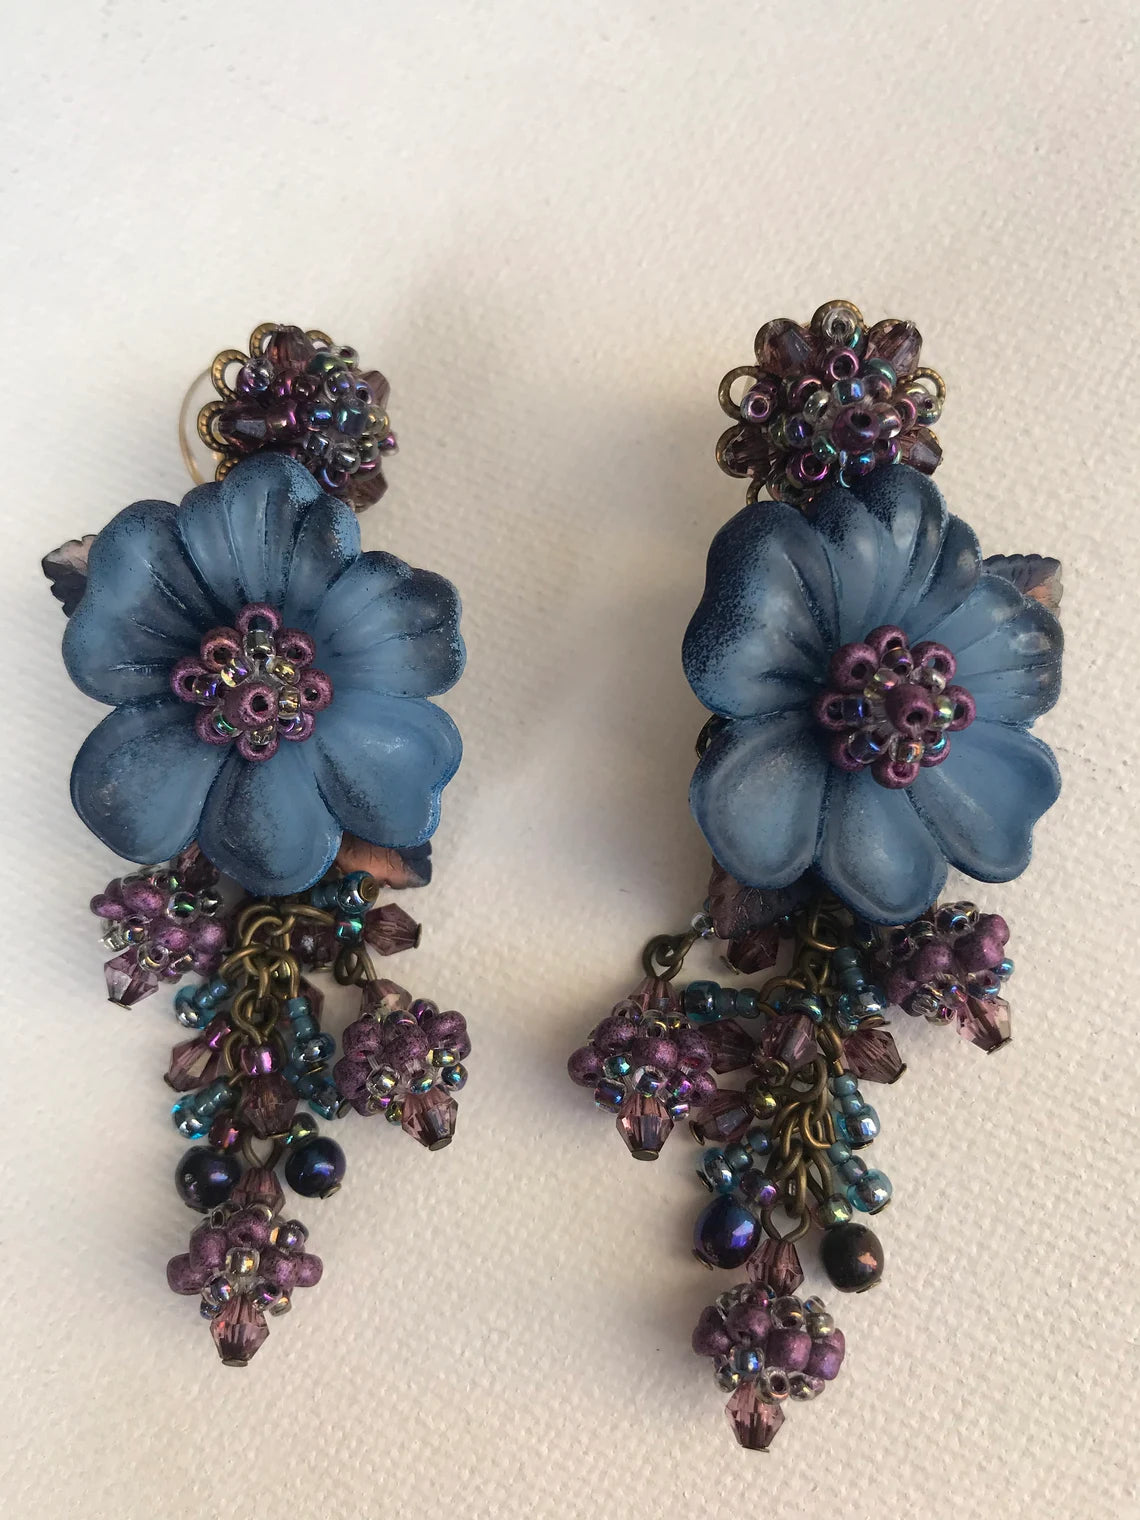 Victorian Handmade Earrings by Colleen Toland